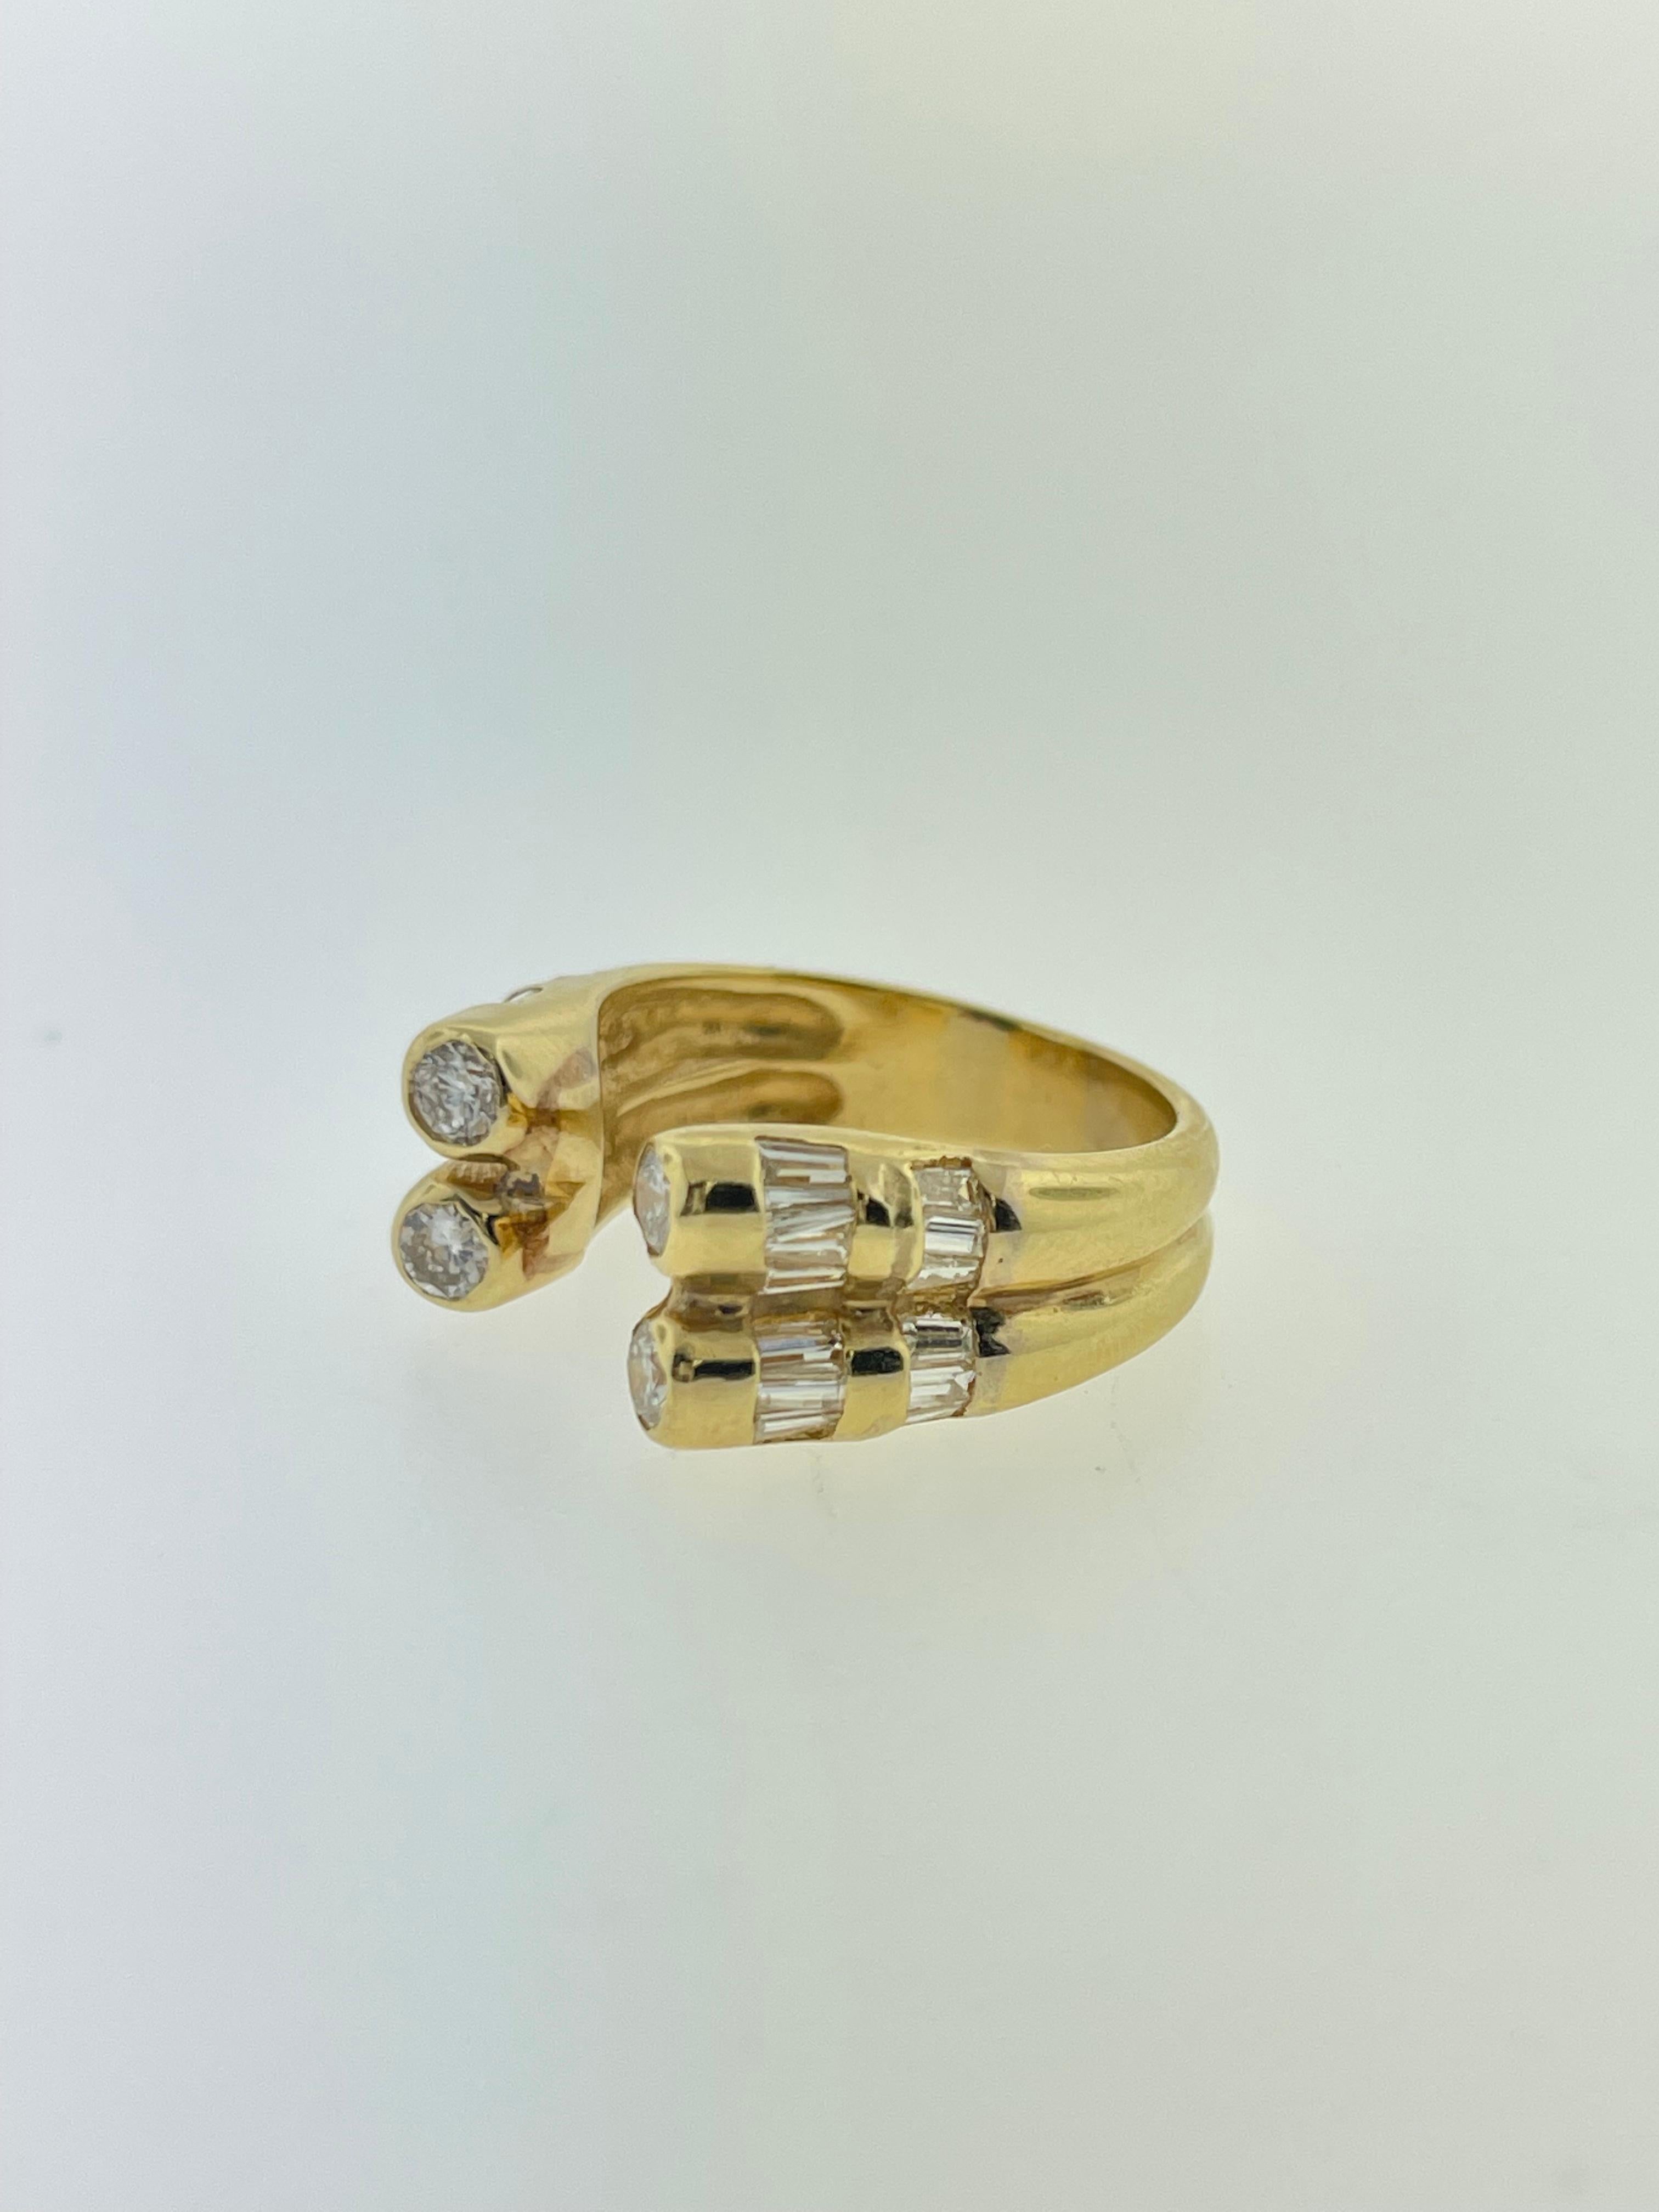 This vintage ring is set in 18K Yellow gold and with many beautiful, bright diamonds! With a mixture of round and baguette diamonds, this ring would look perfect on your finger! 